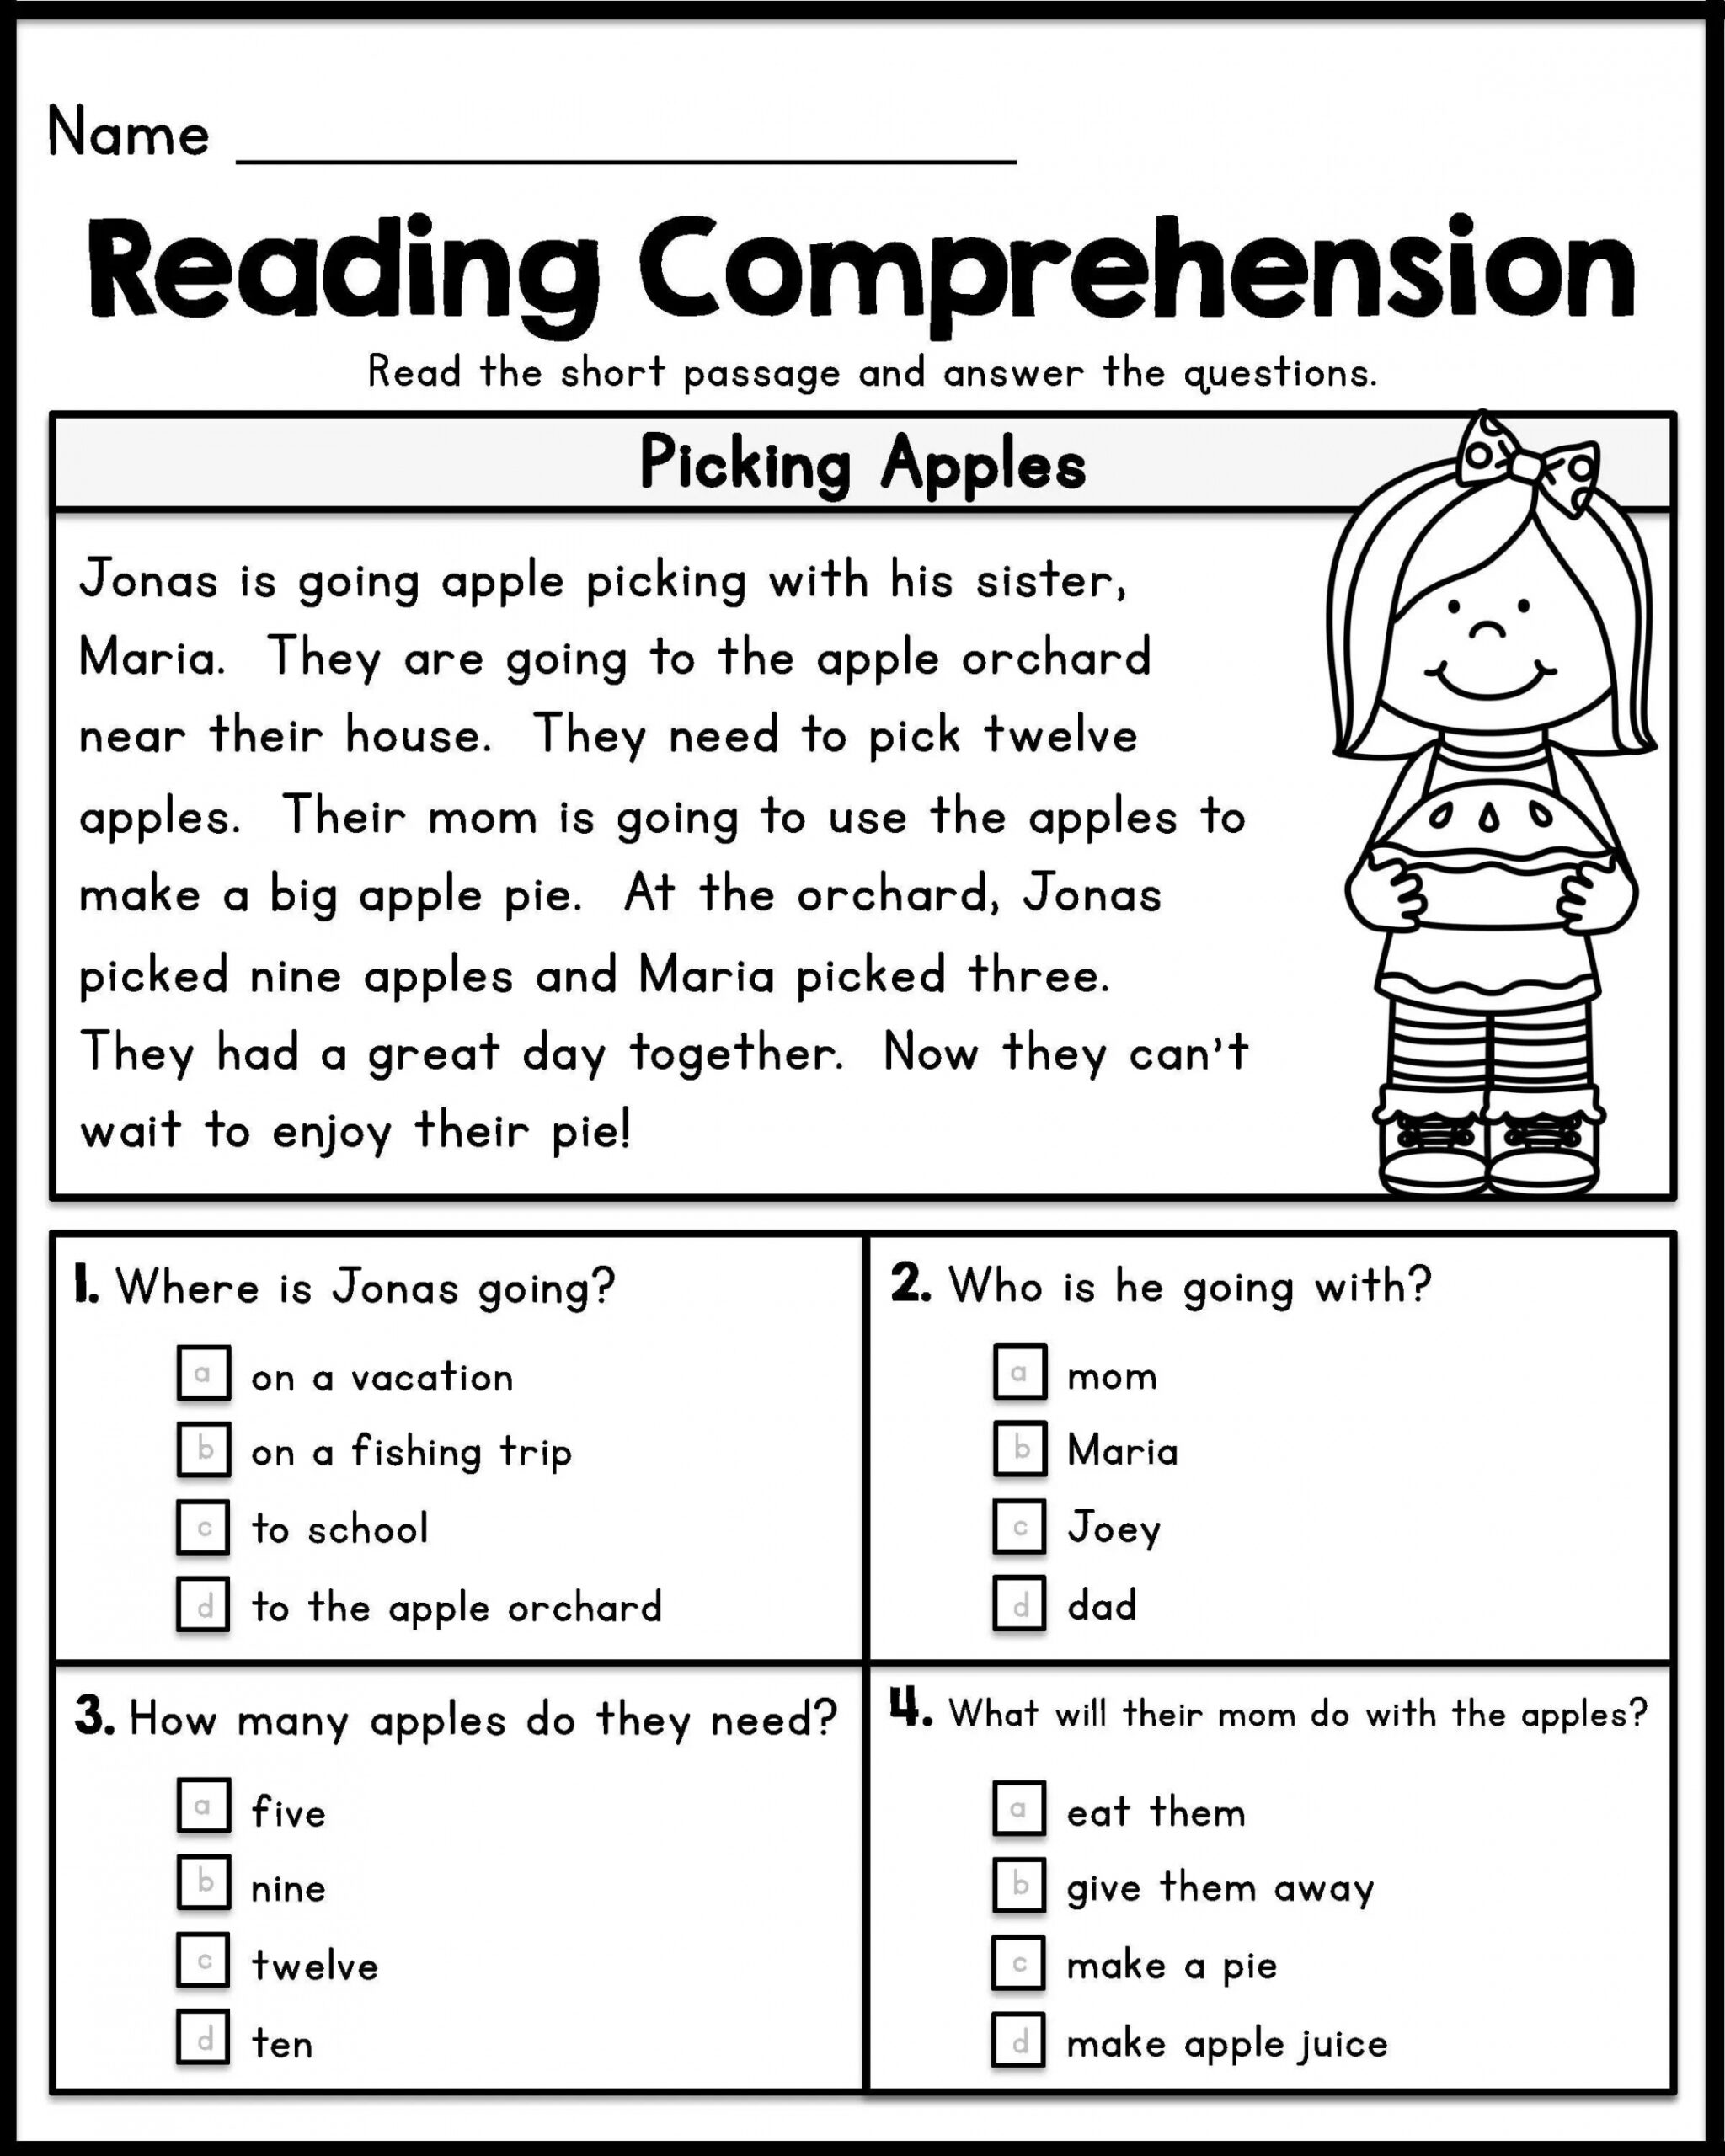 St Grade Reading Comprehension Worksheets Pdf is really a sheet